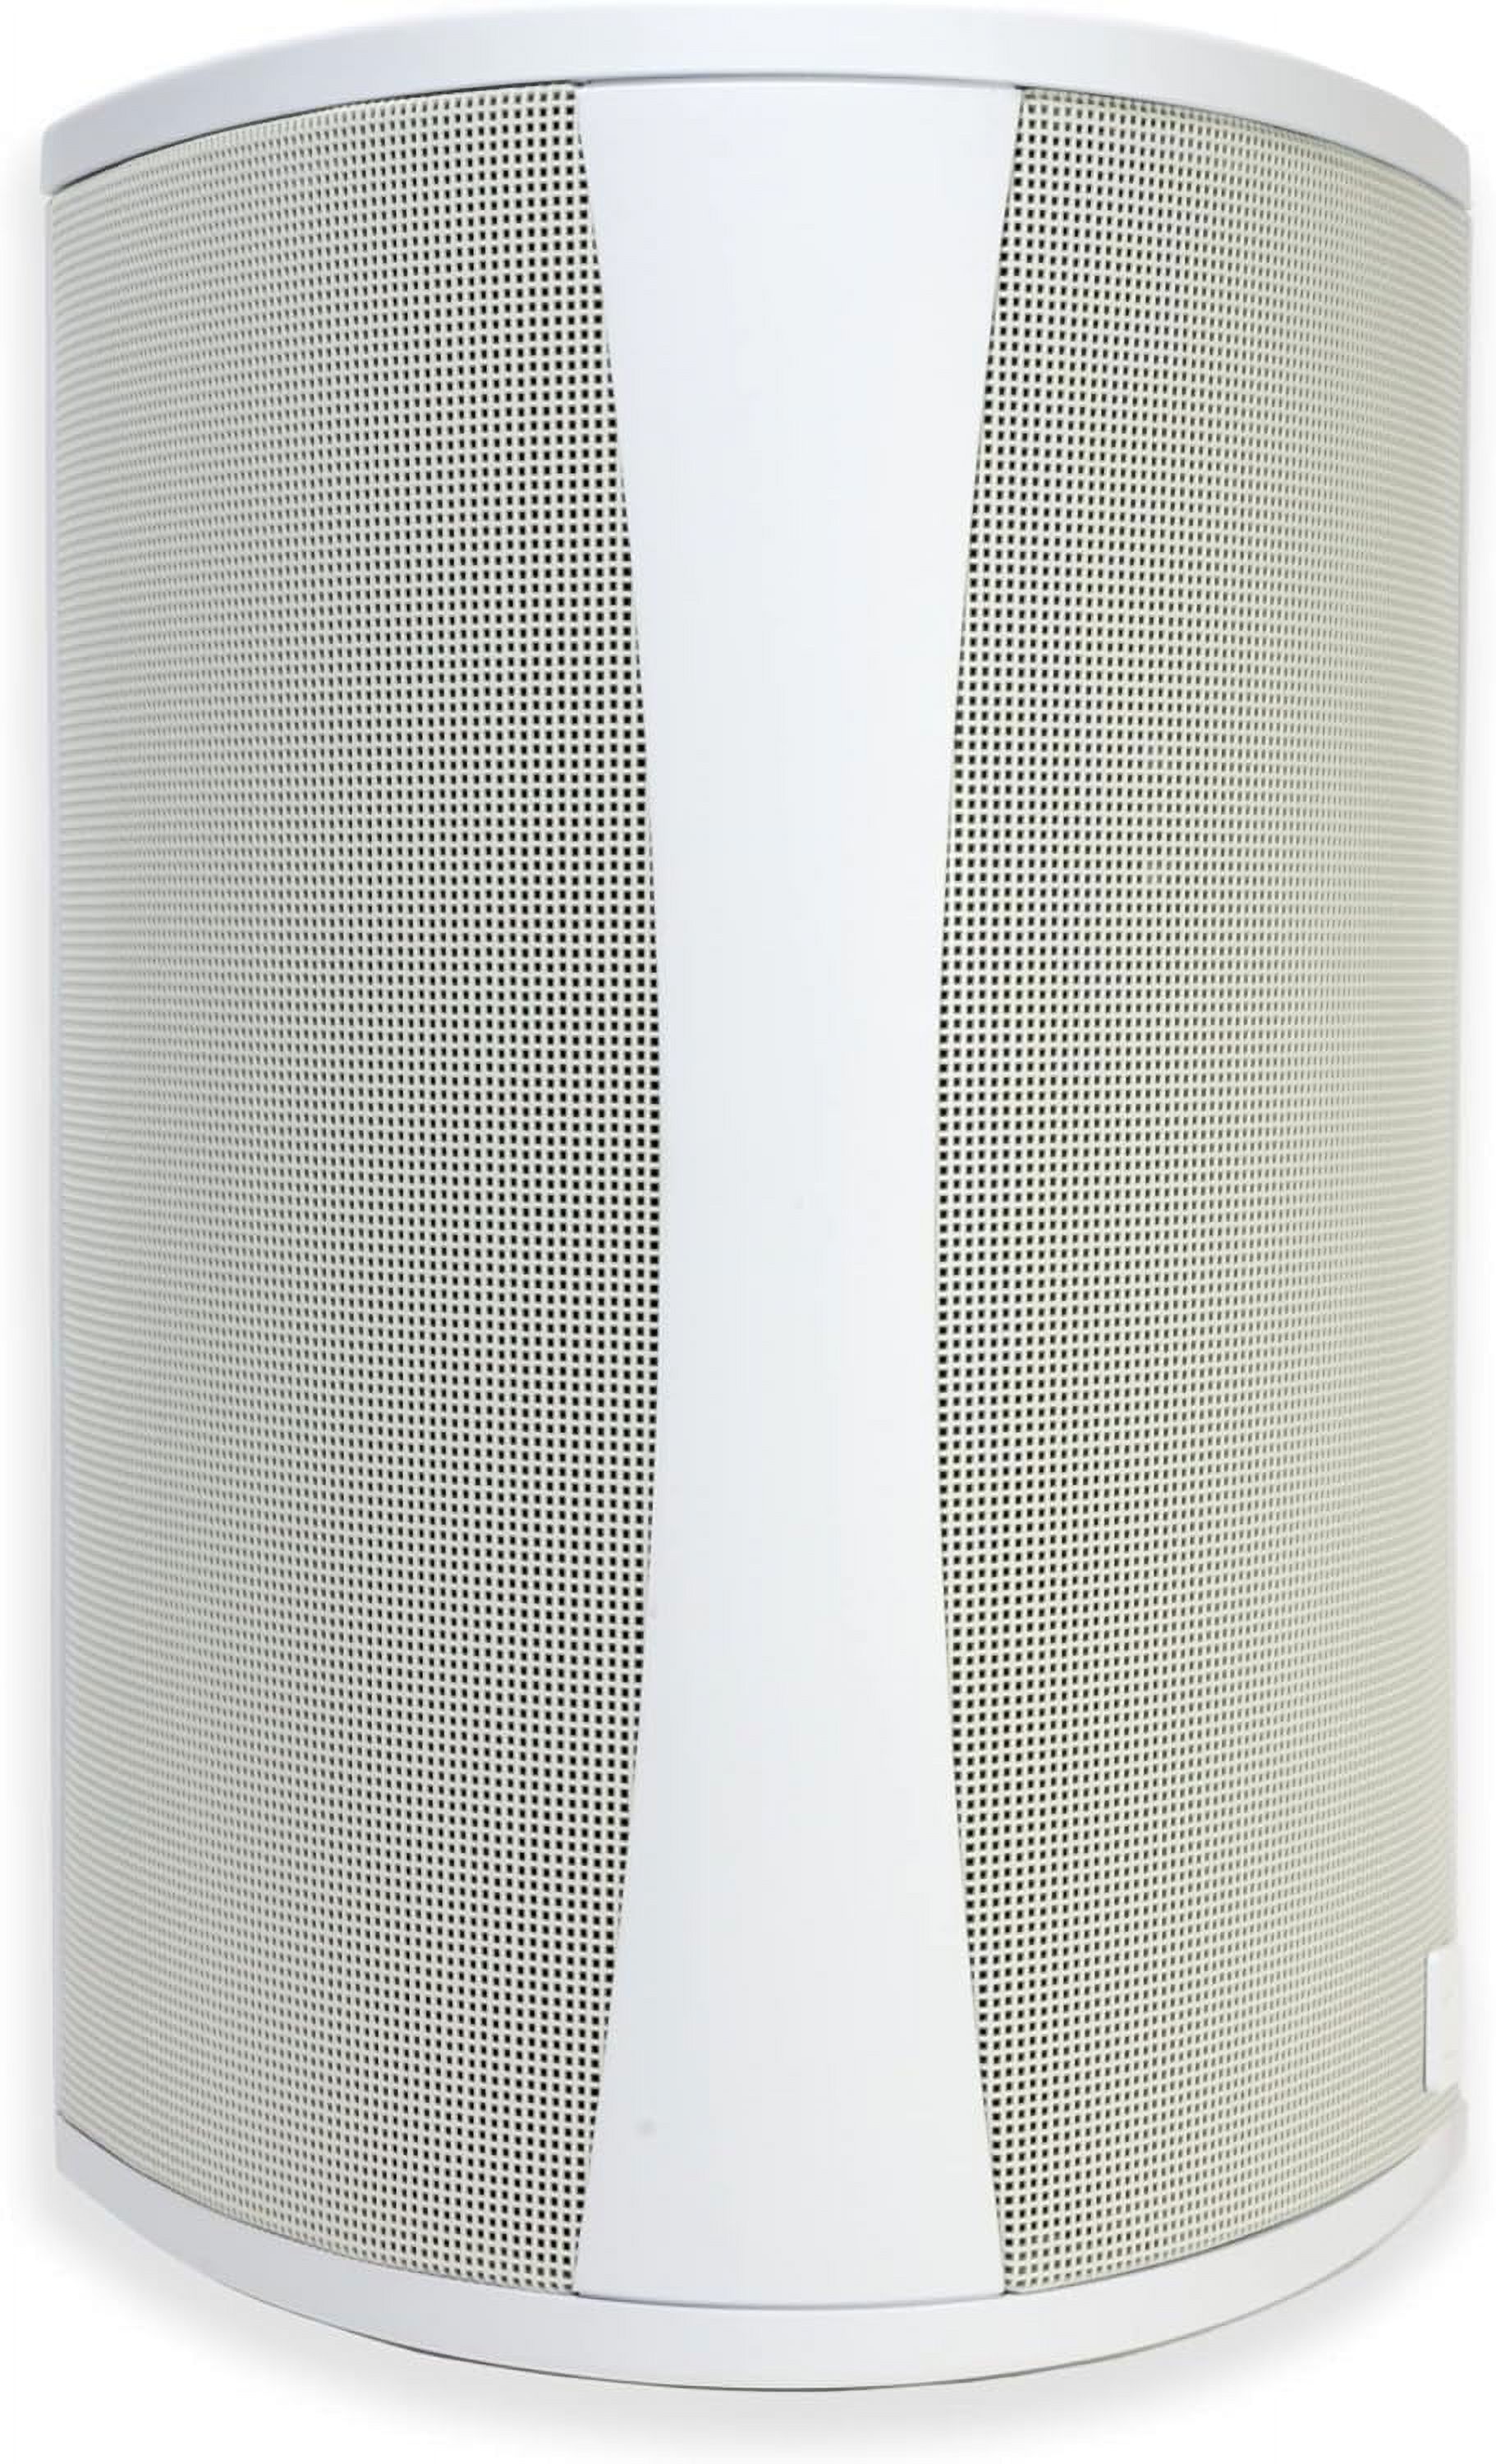 Definitive Technology AW 5500 Outdoor Speaker (Single, White) - image 2 of 8